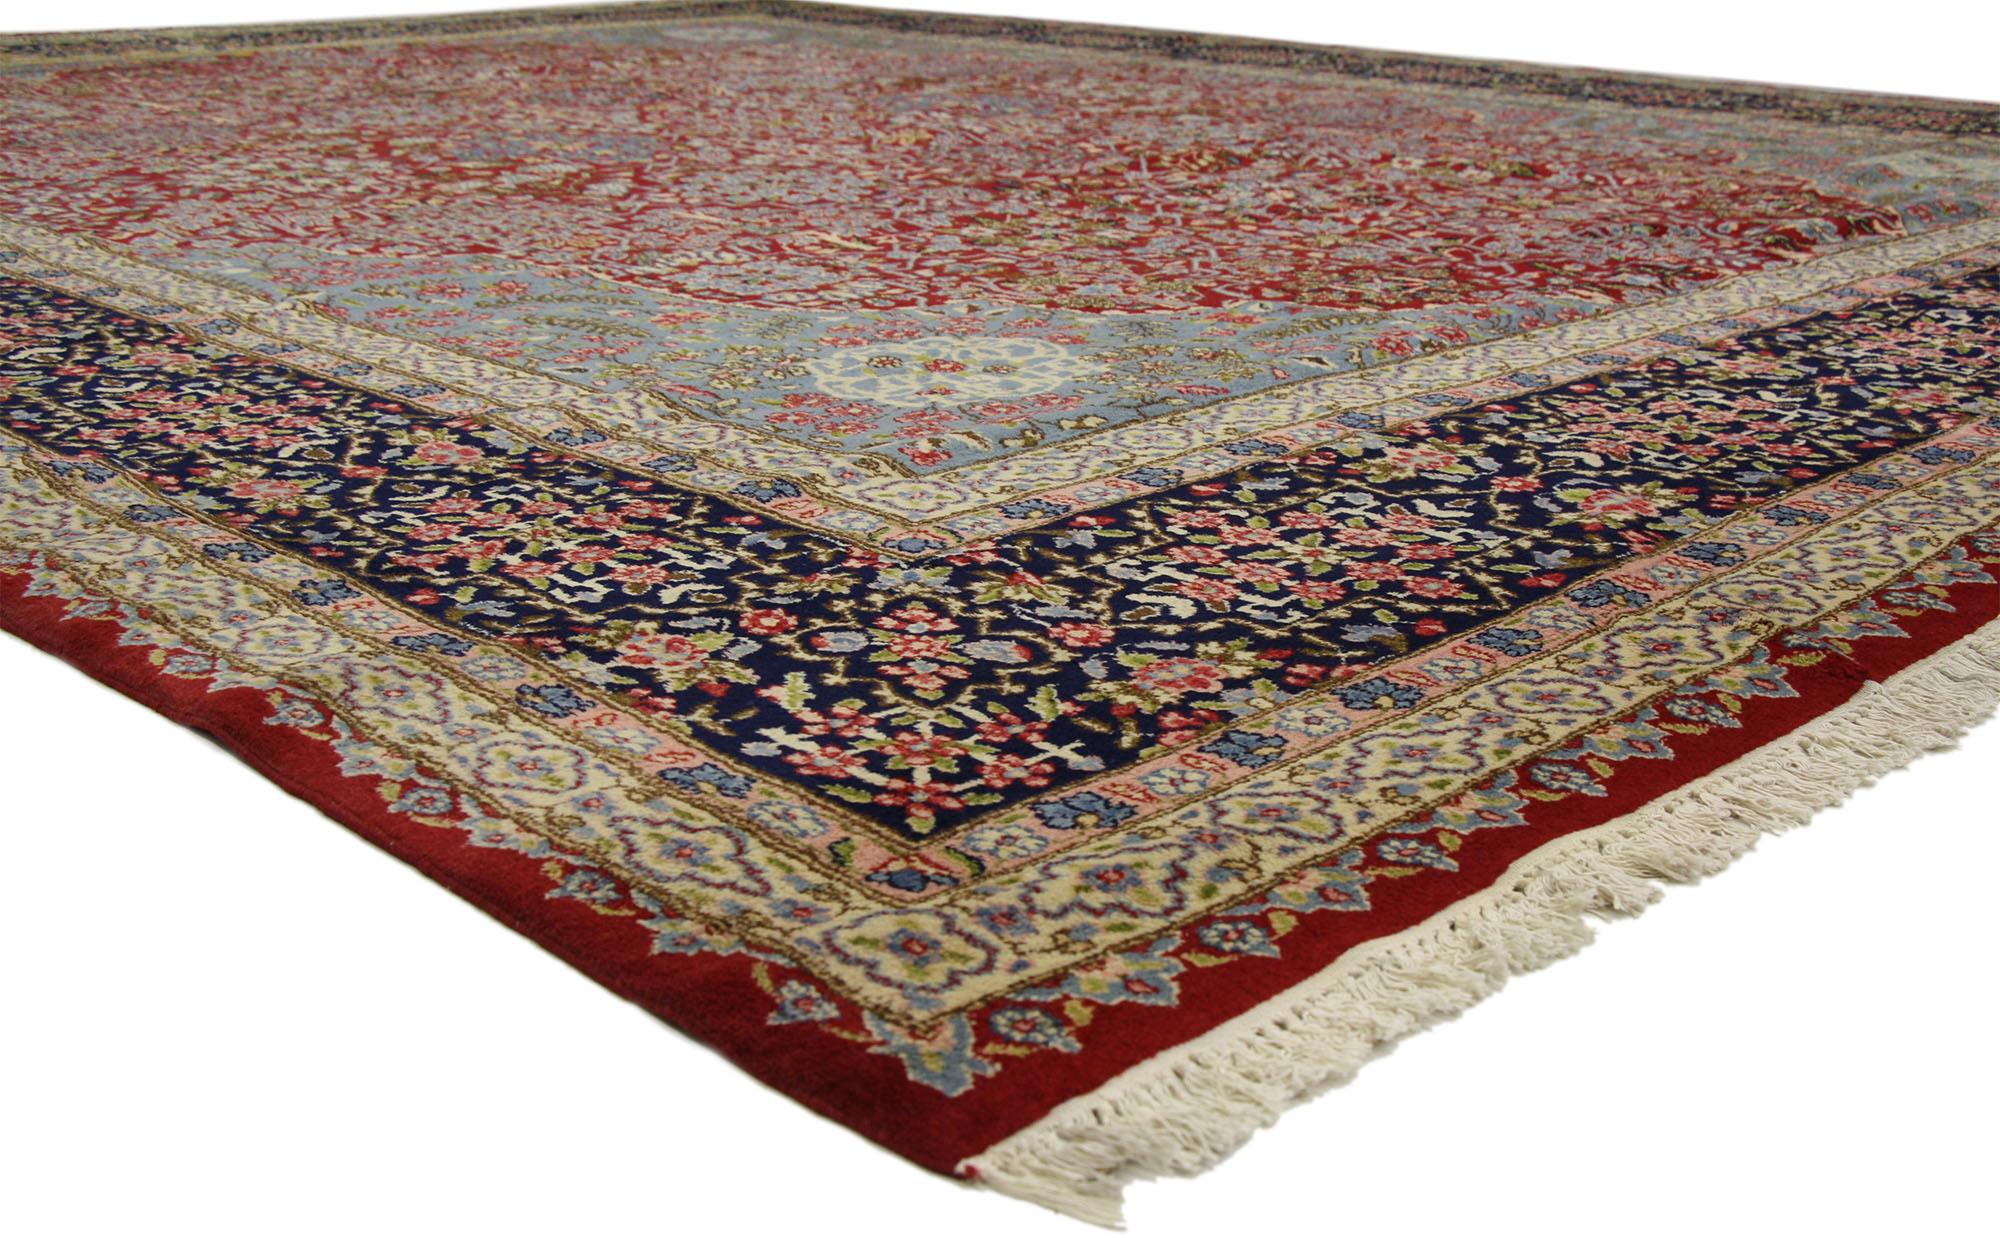 76443 vintage Persian Kerman rug with Traditional English Manor style. With a timeless floral design and striking appeal, this hand knotted wool vintage Persian Kerman rug charms with ease and beautifully embodies? traditional English Manor style.